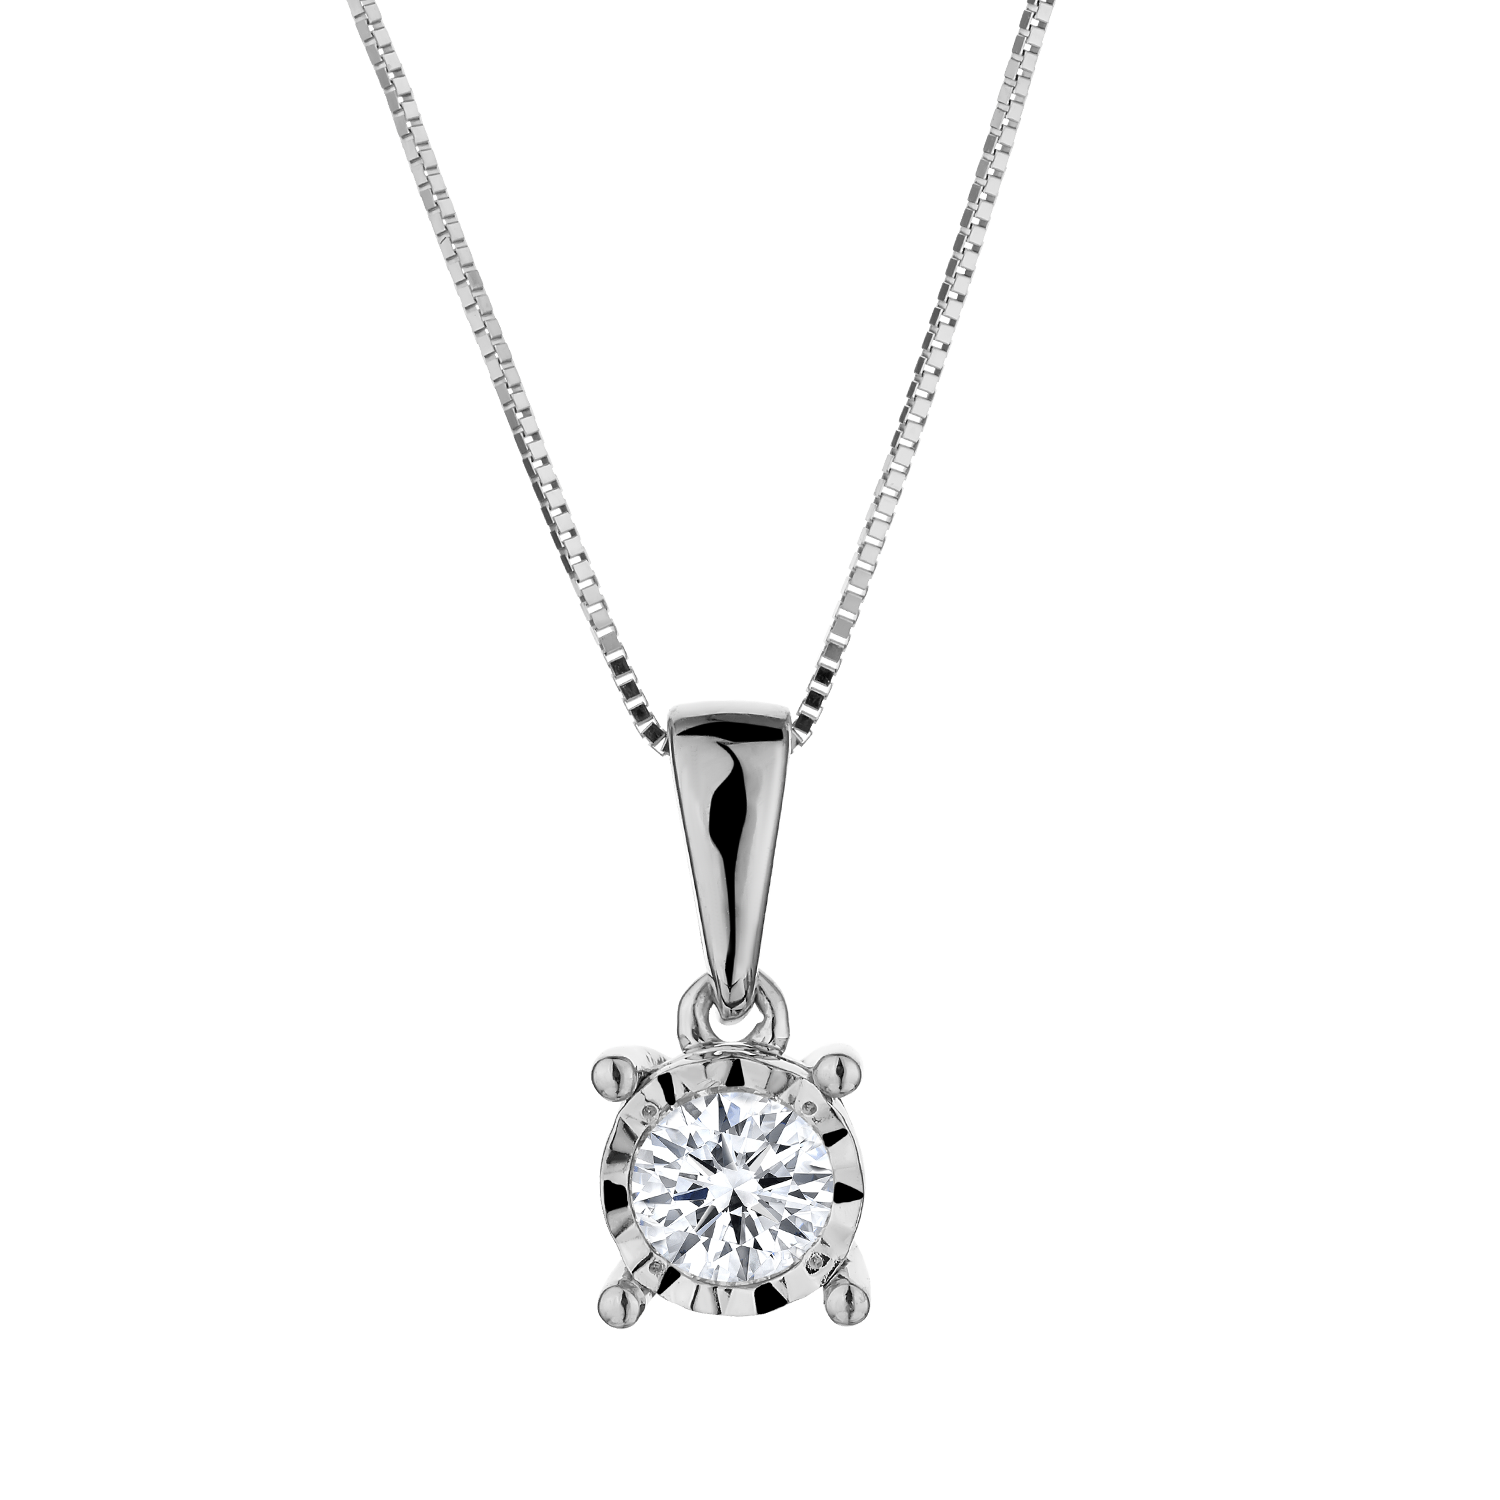 .20 Carat Diamond "Miracle" Pendant,  14kt White Gold. Necklaces and Pendants. Griffin Jewellery Designs.